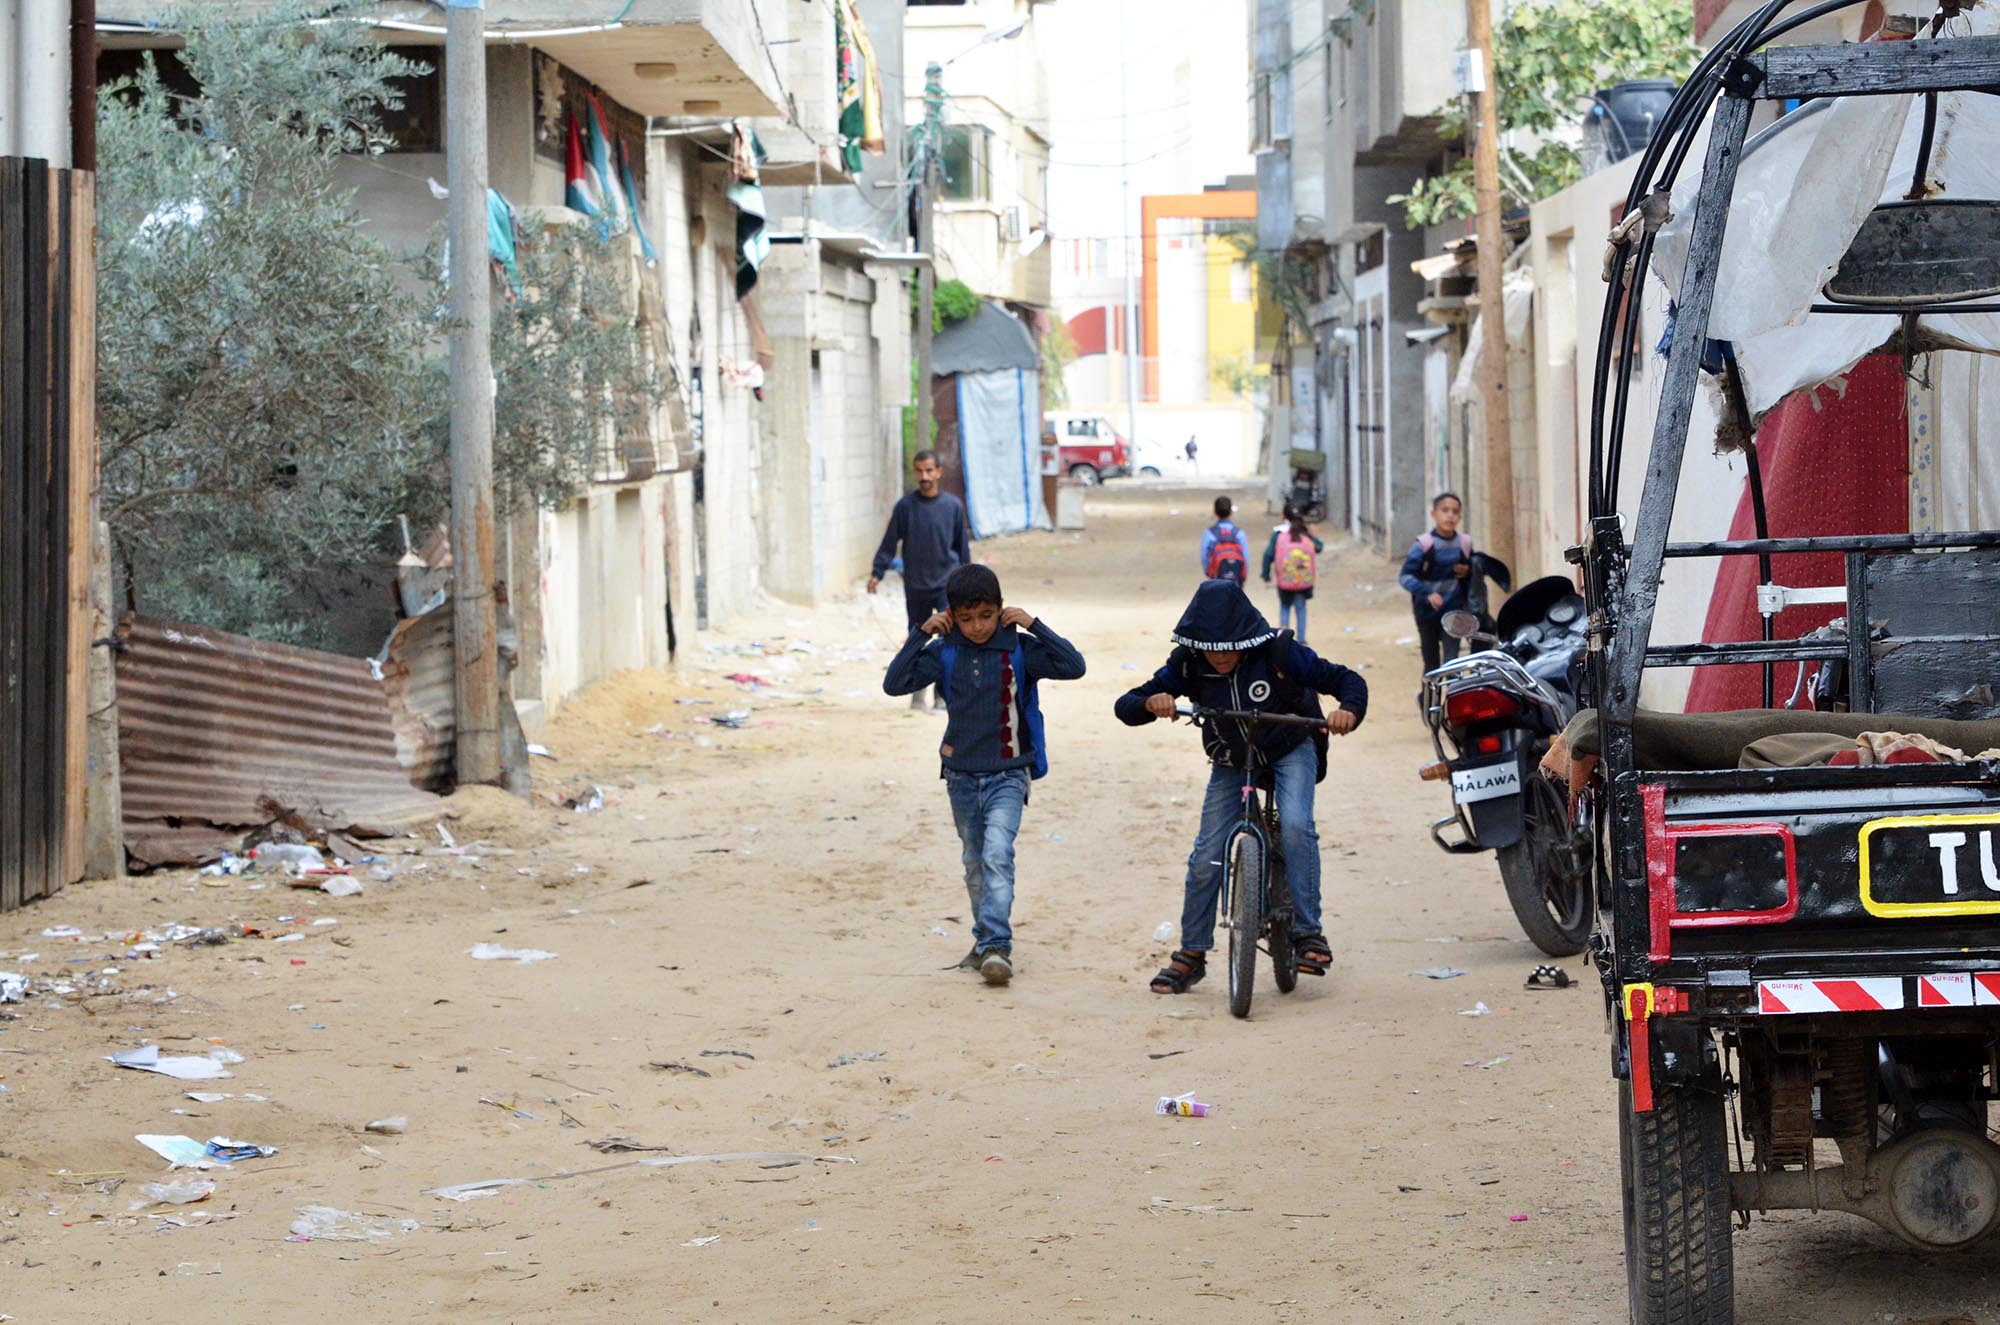 A typical unpaved road in Zeitoun, Gaza.